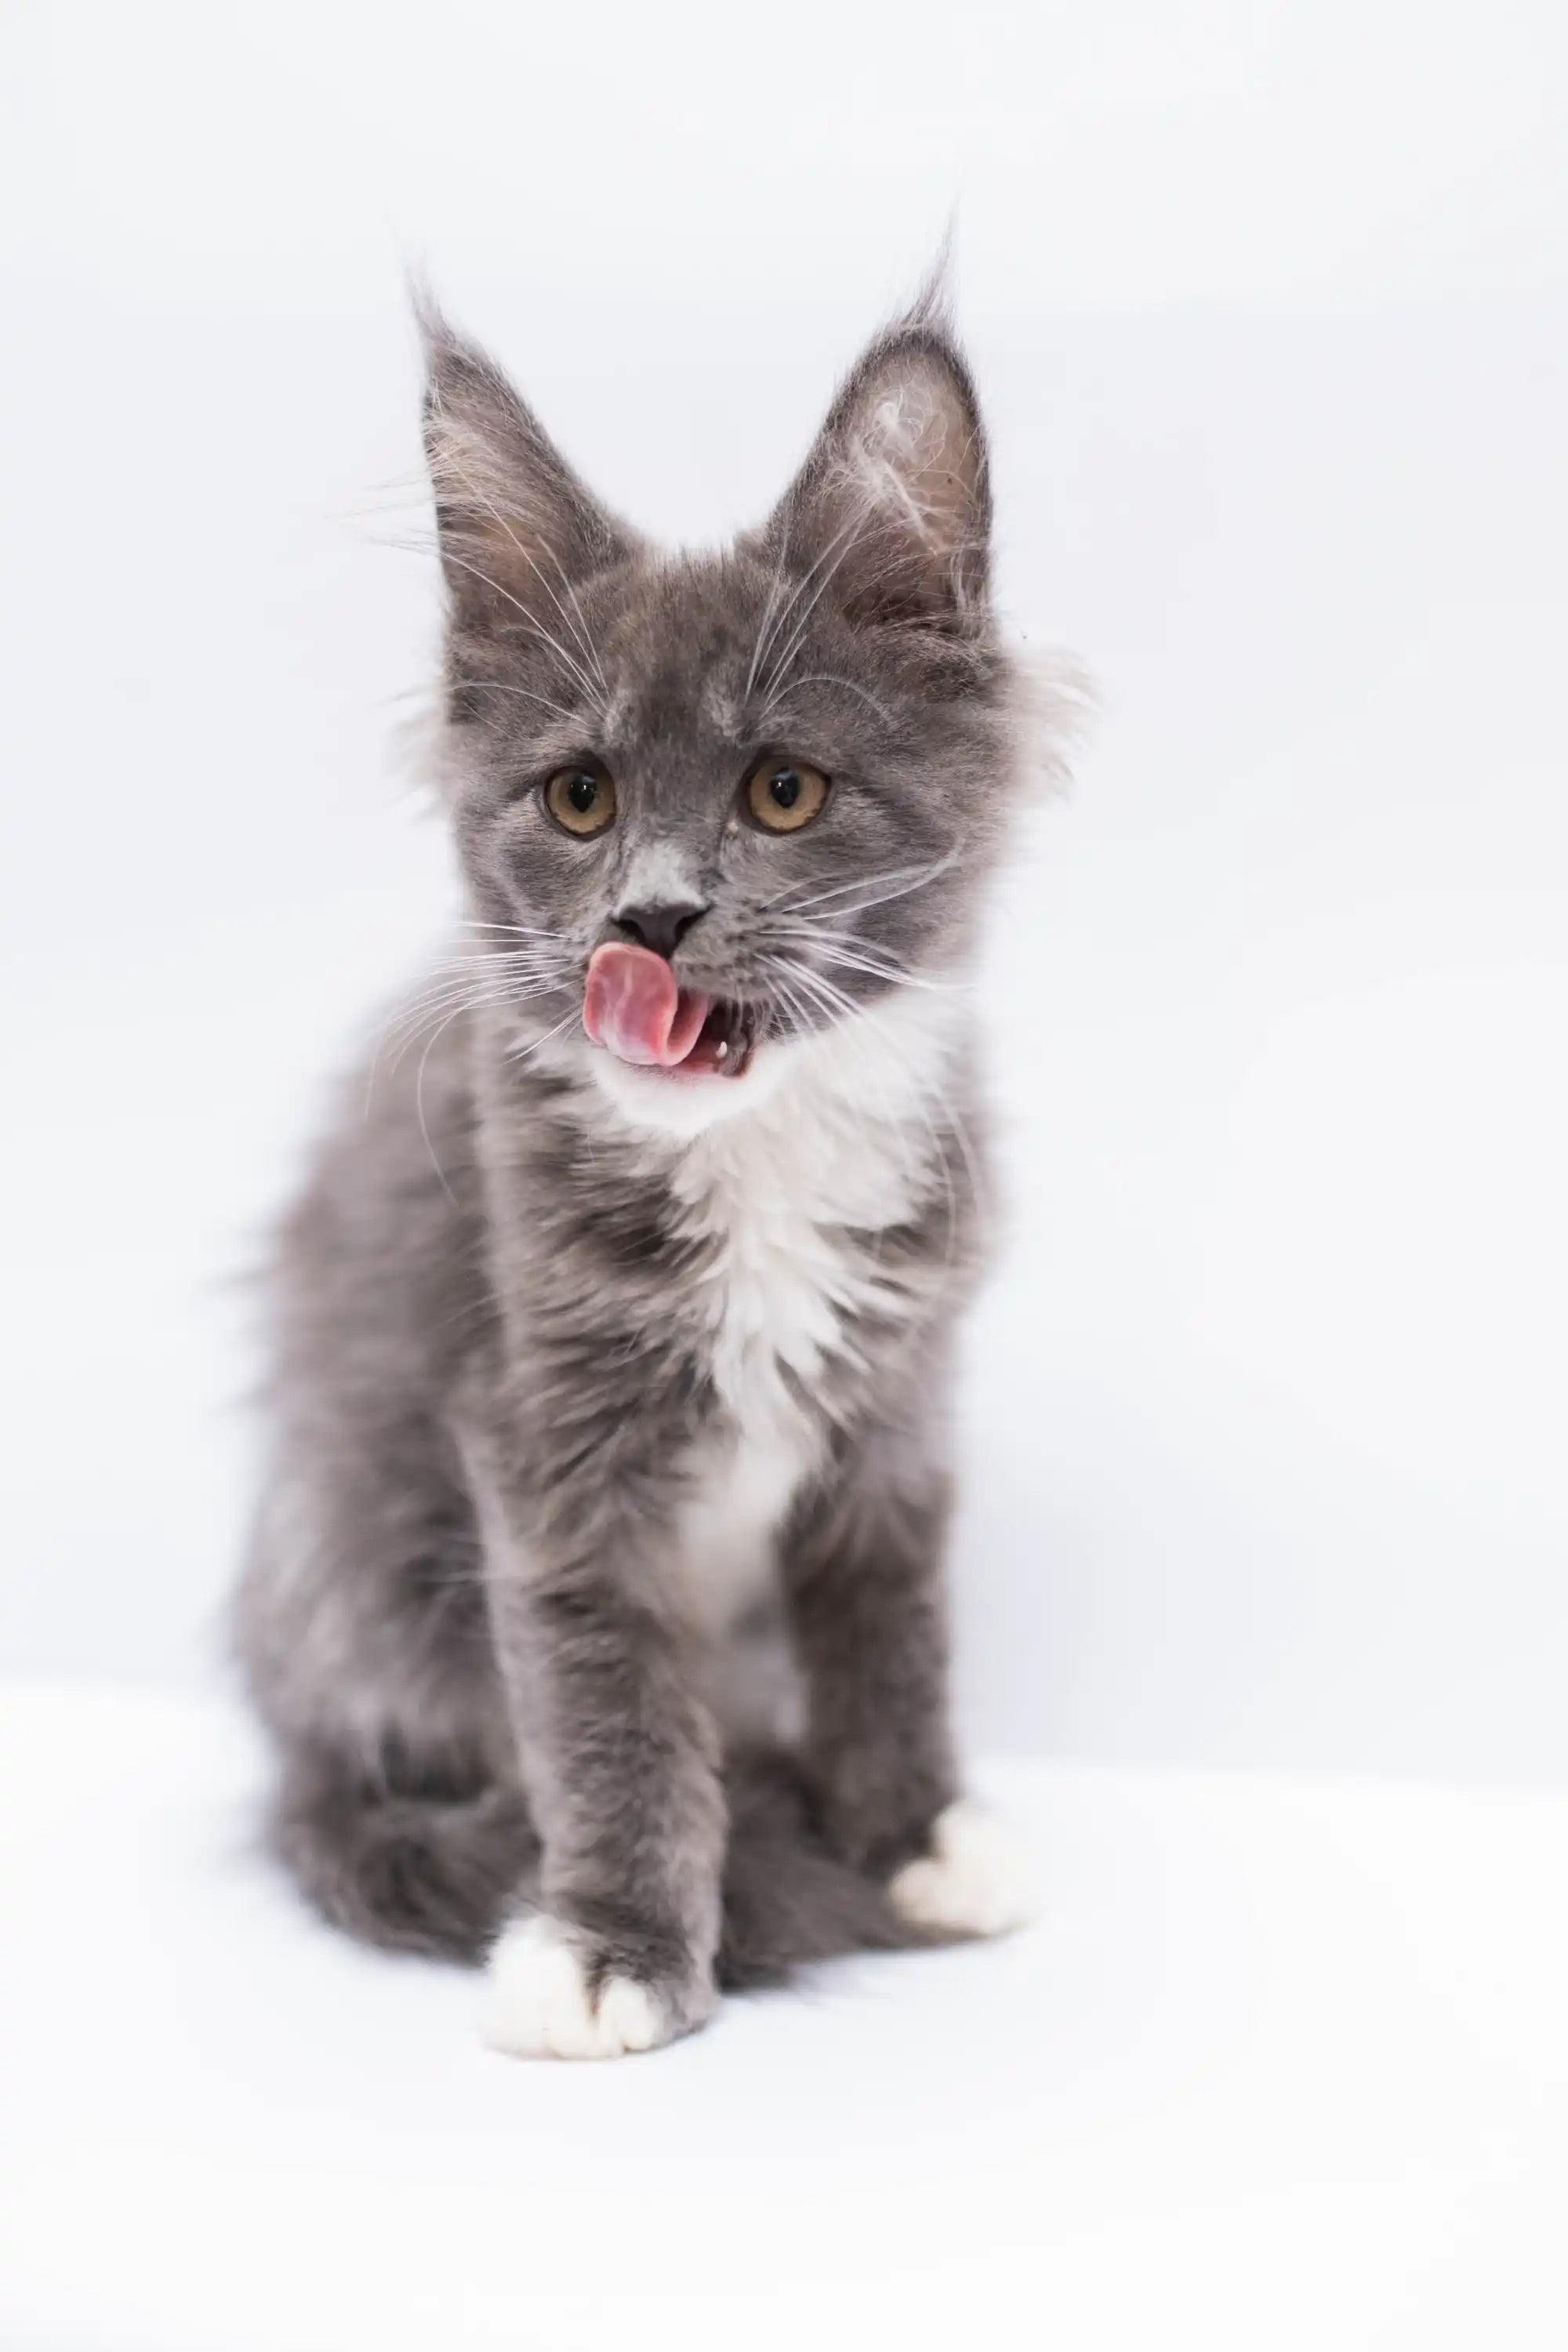 Maine Coon Kittens for Sale Law | Kitten